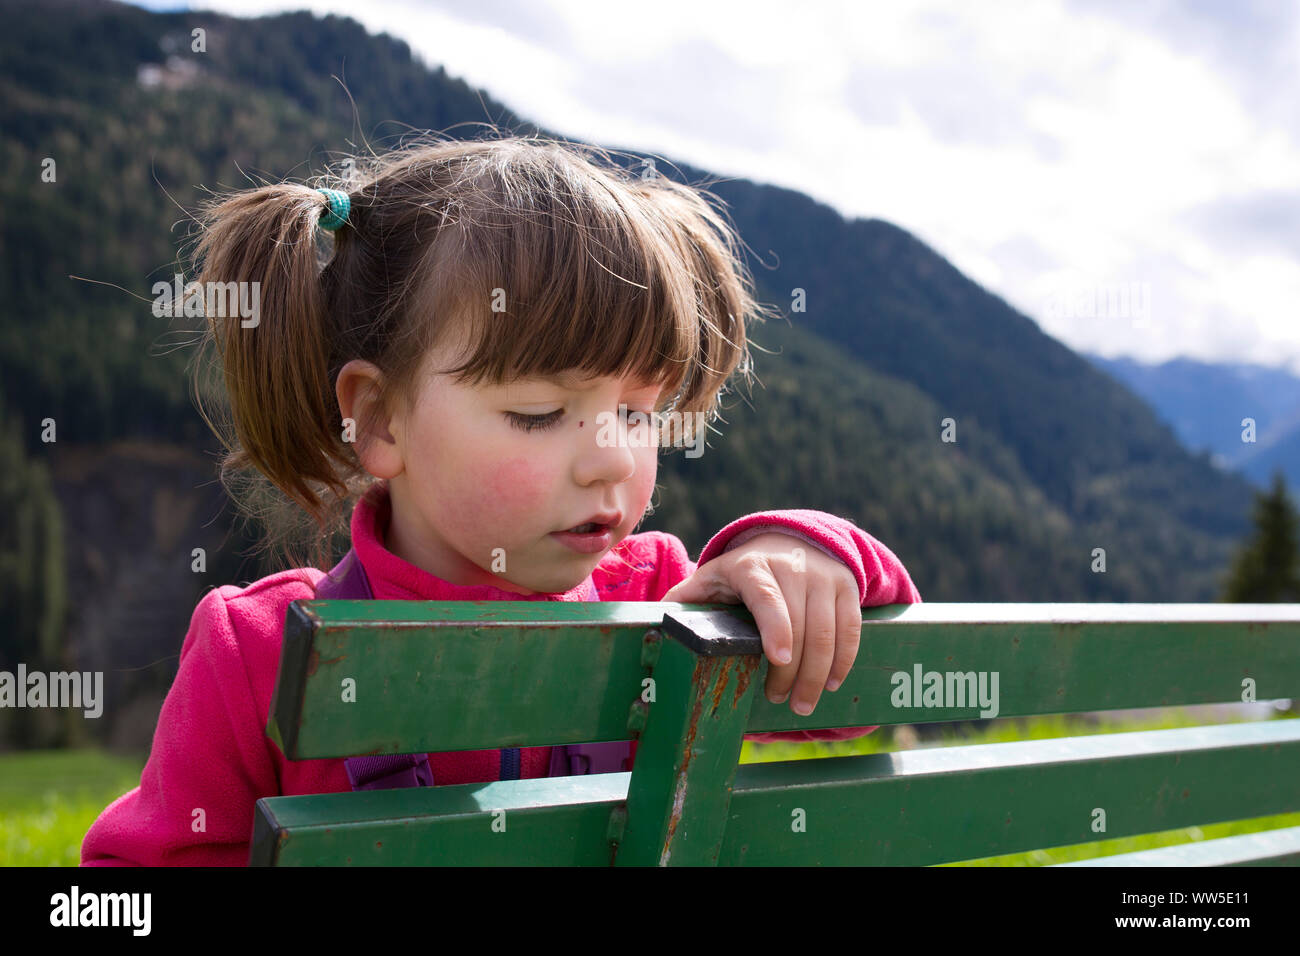 4-6 years old girl with plaits sitting on green bench Stock Photo